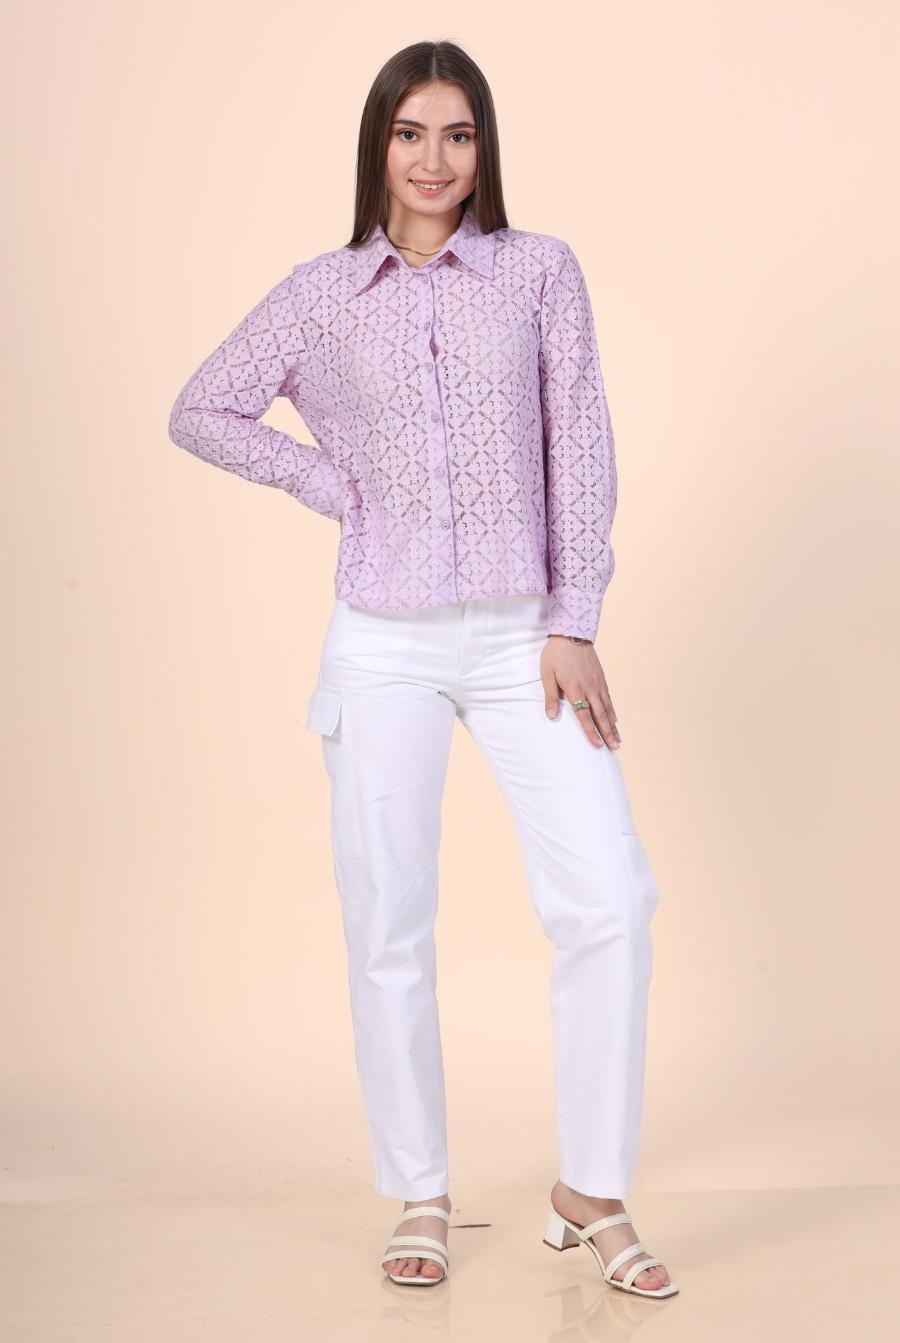 a woman wearing a purple shirt made from winslet's button down shirt sewing pattern and white pants